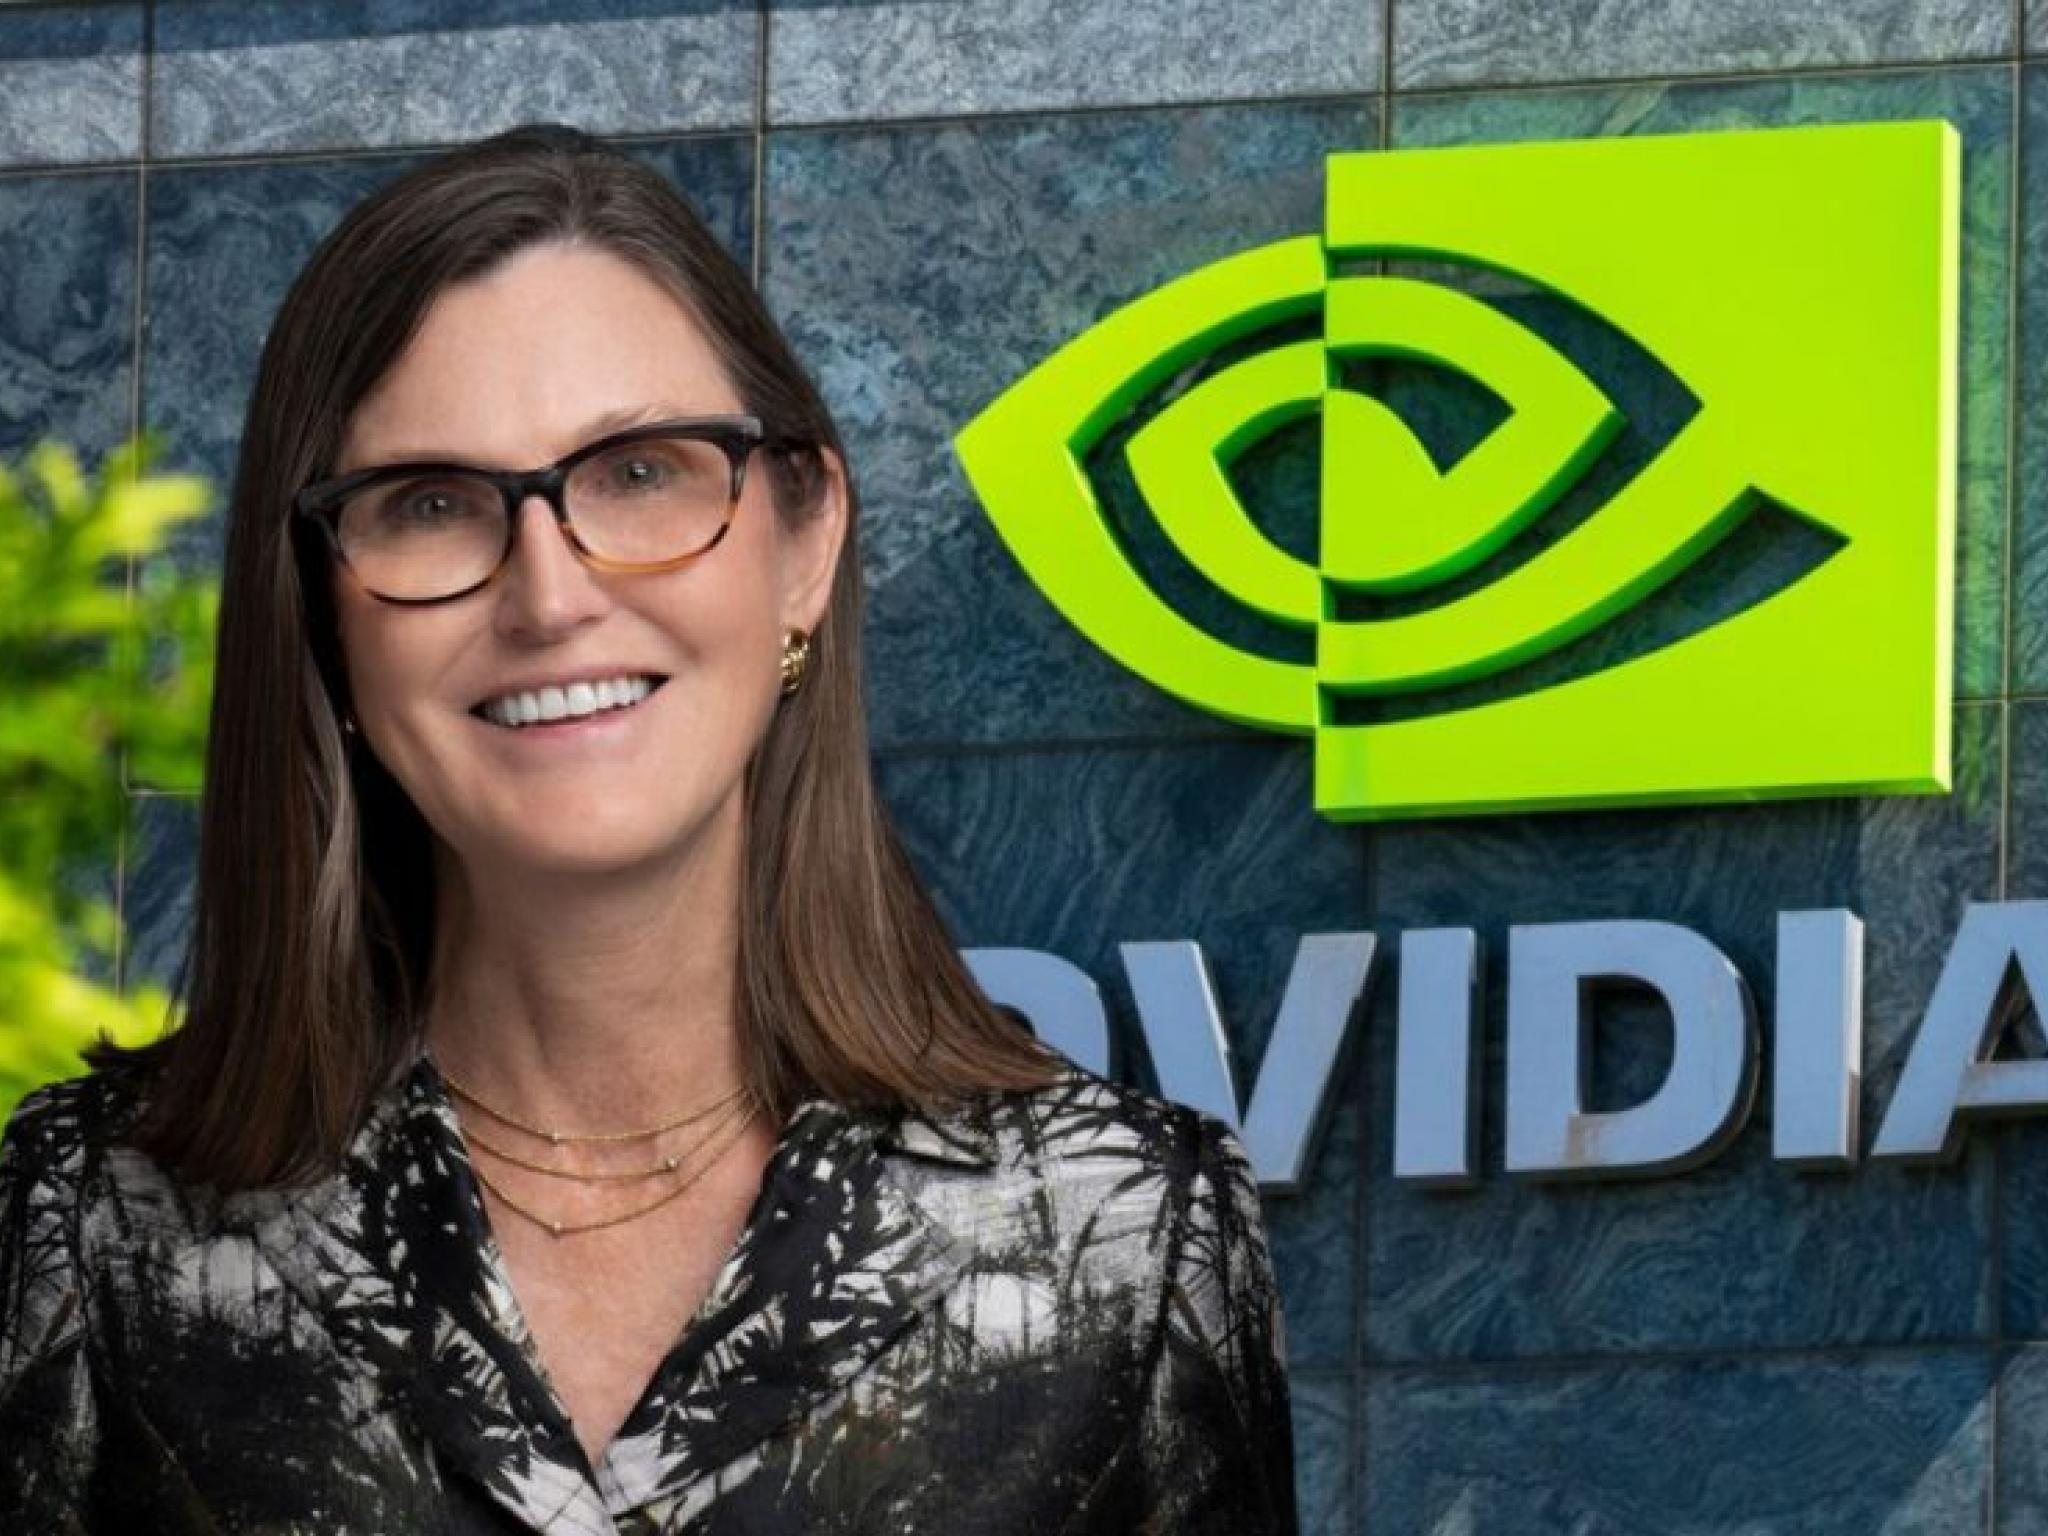  heres-how-much-cathie-wood-ark-invest-flagship-fund-missed-by-selling-nvidia-early 